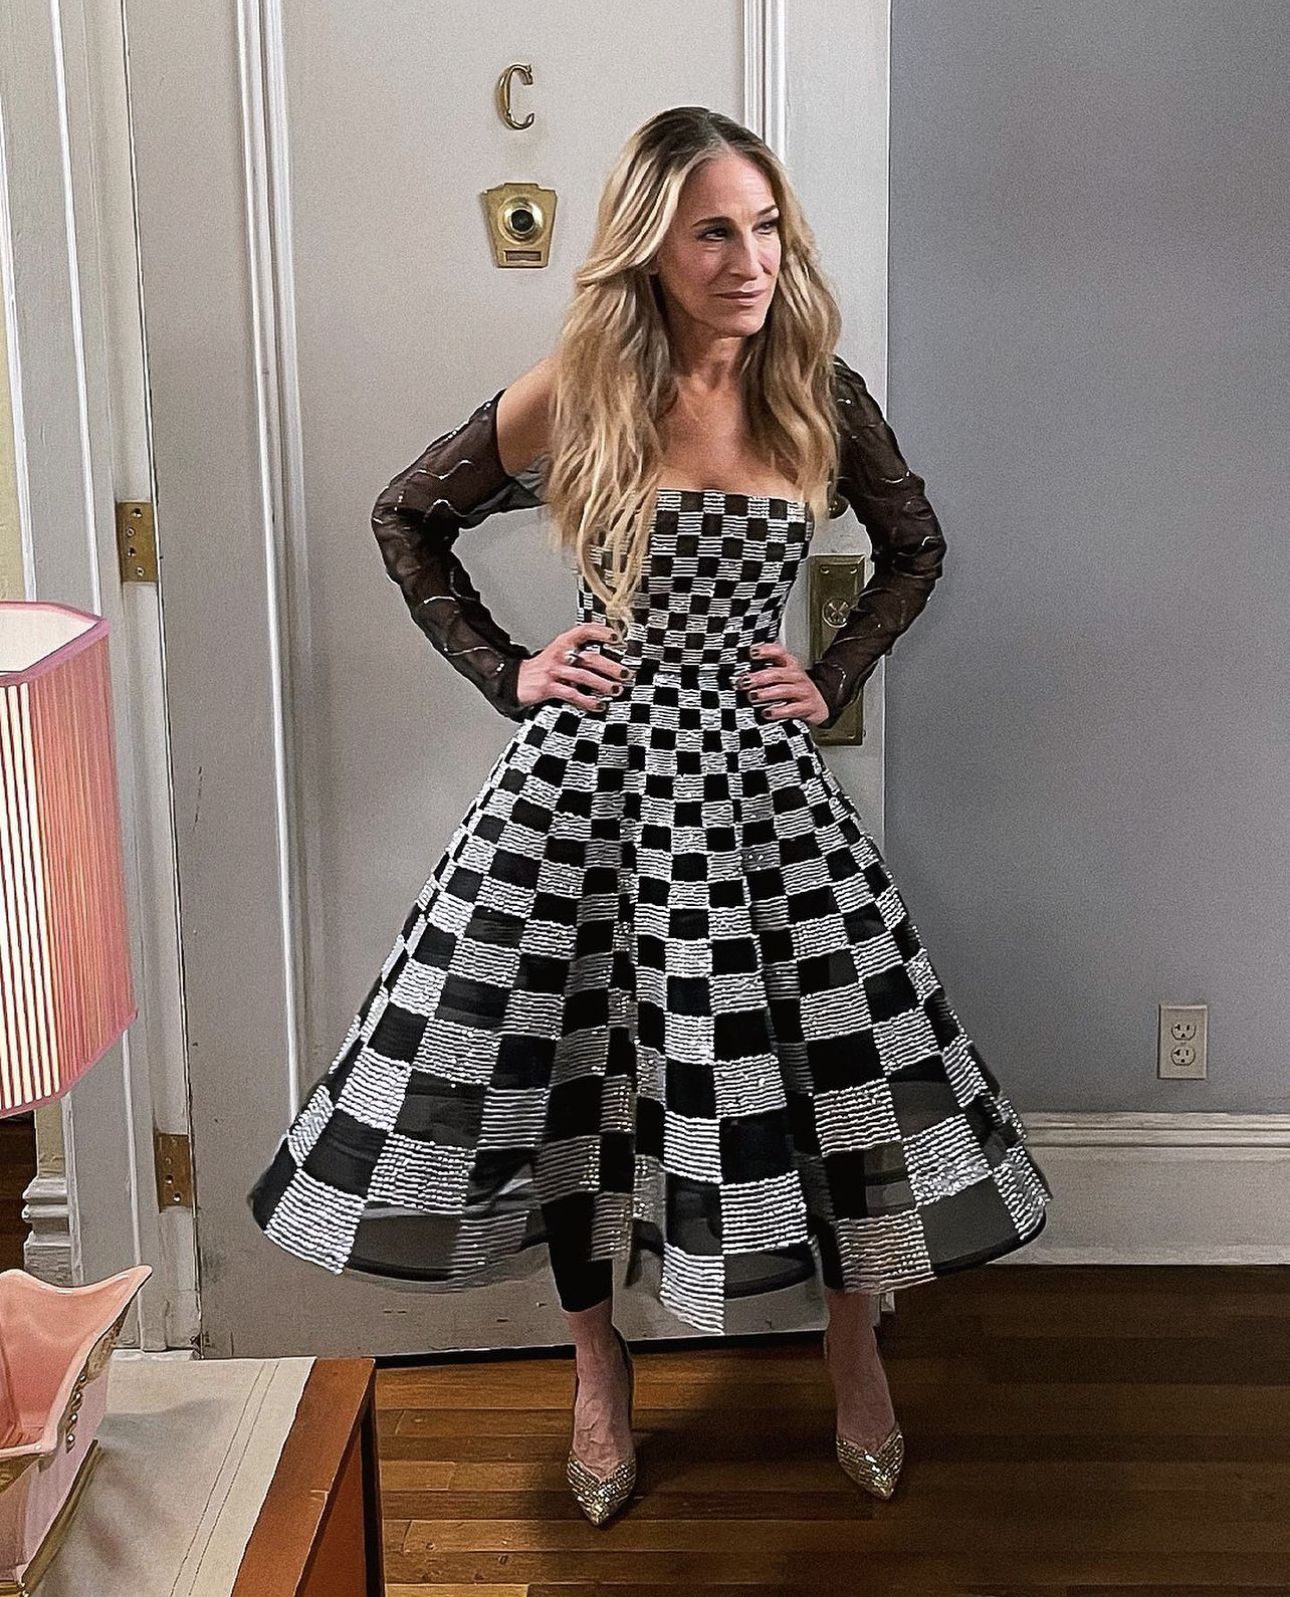 Sarah Jessica Parkers’ Finale Dress On ‘And Just Like That’